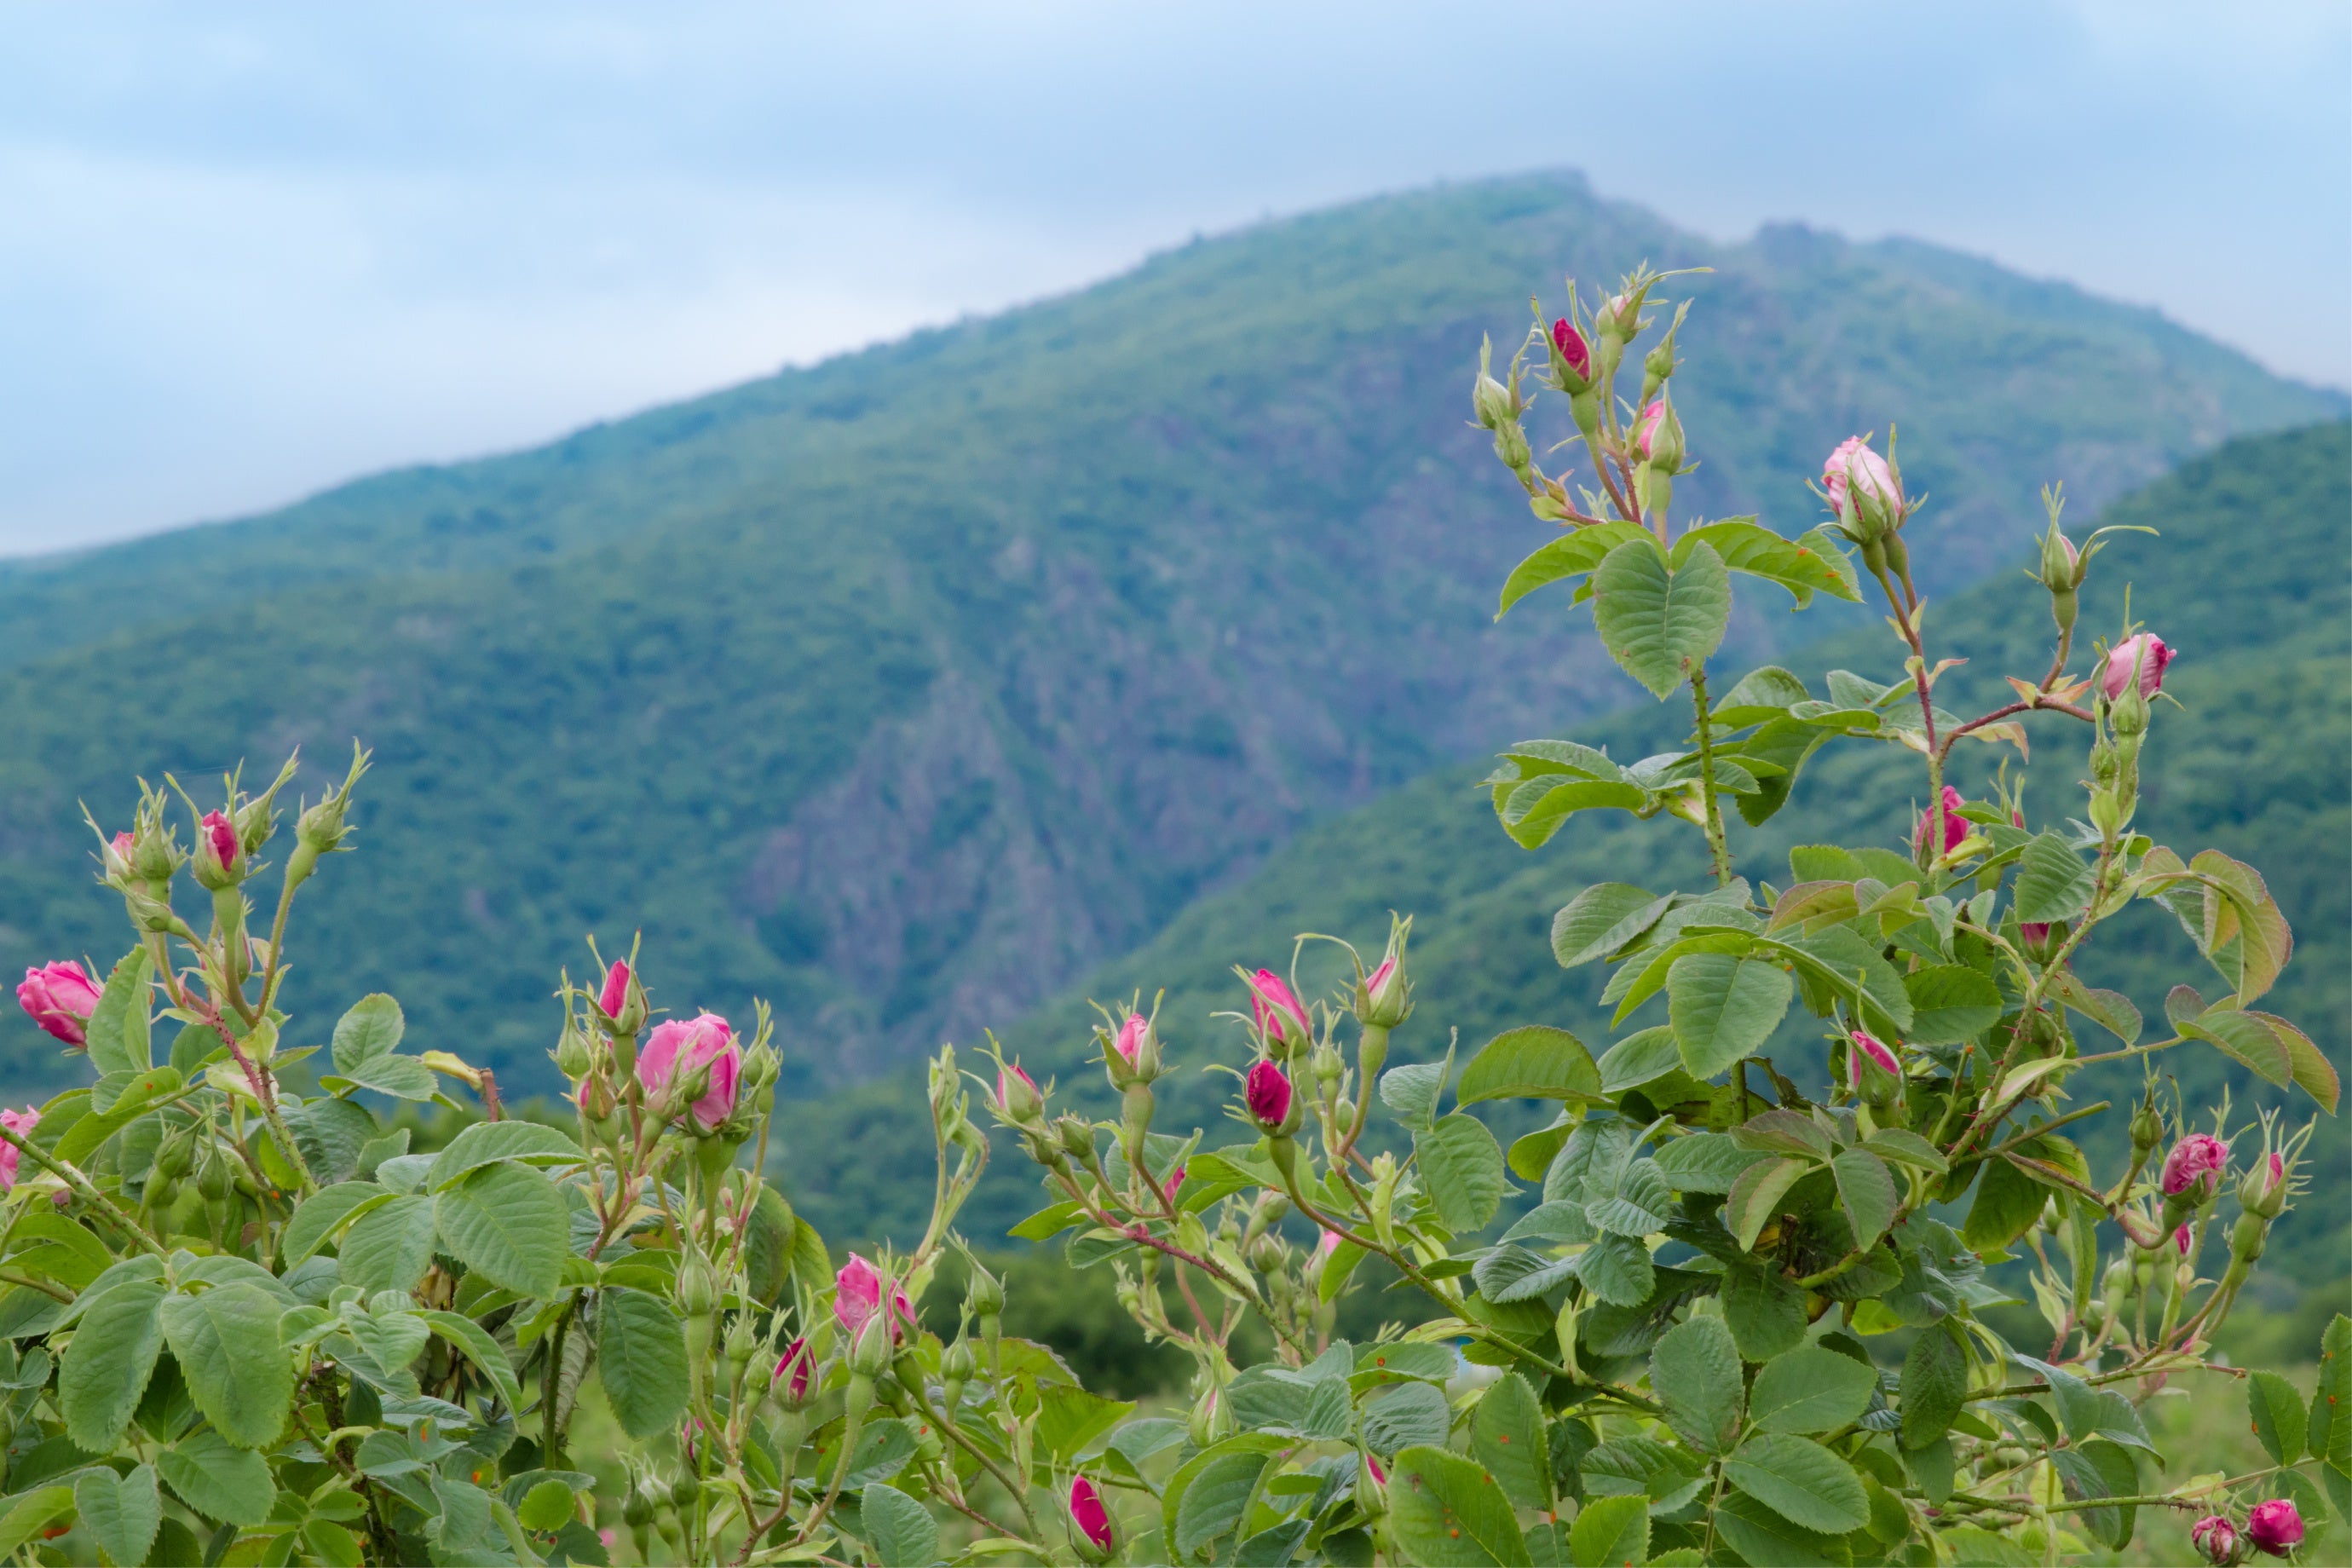 A mountain range with rosa damascena flowers in the background.